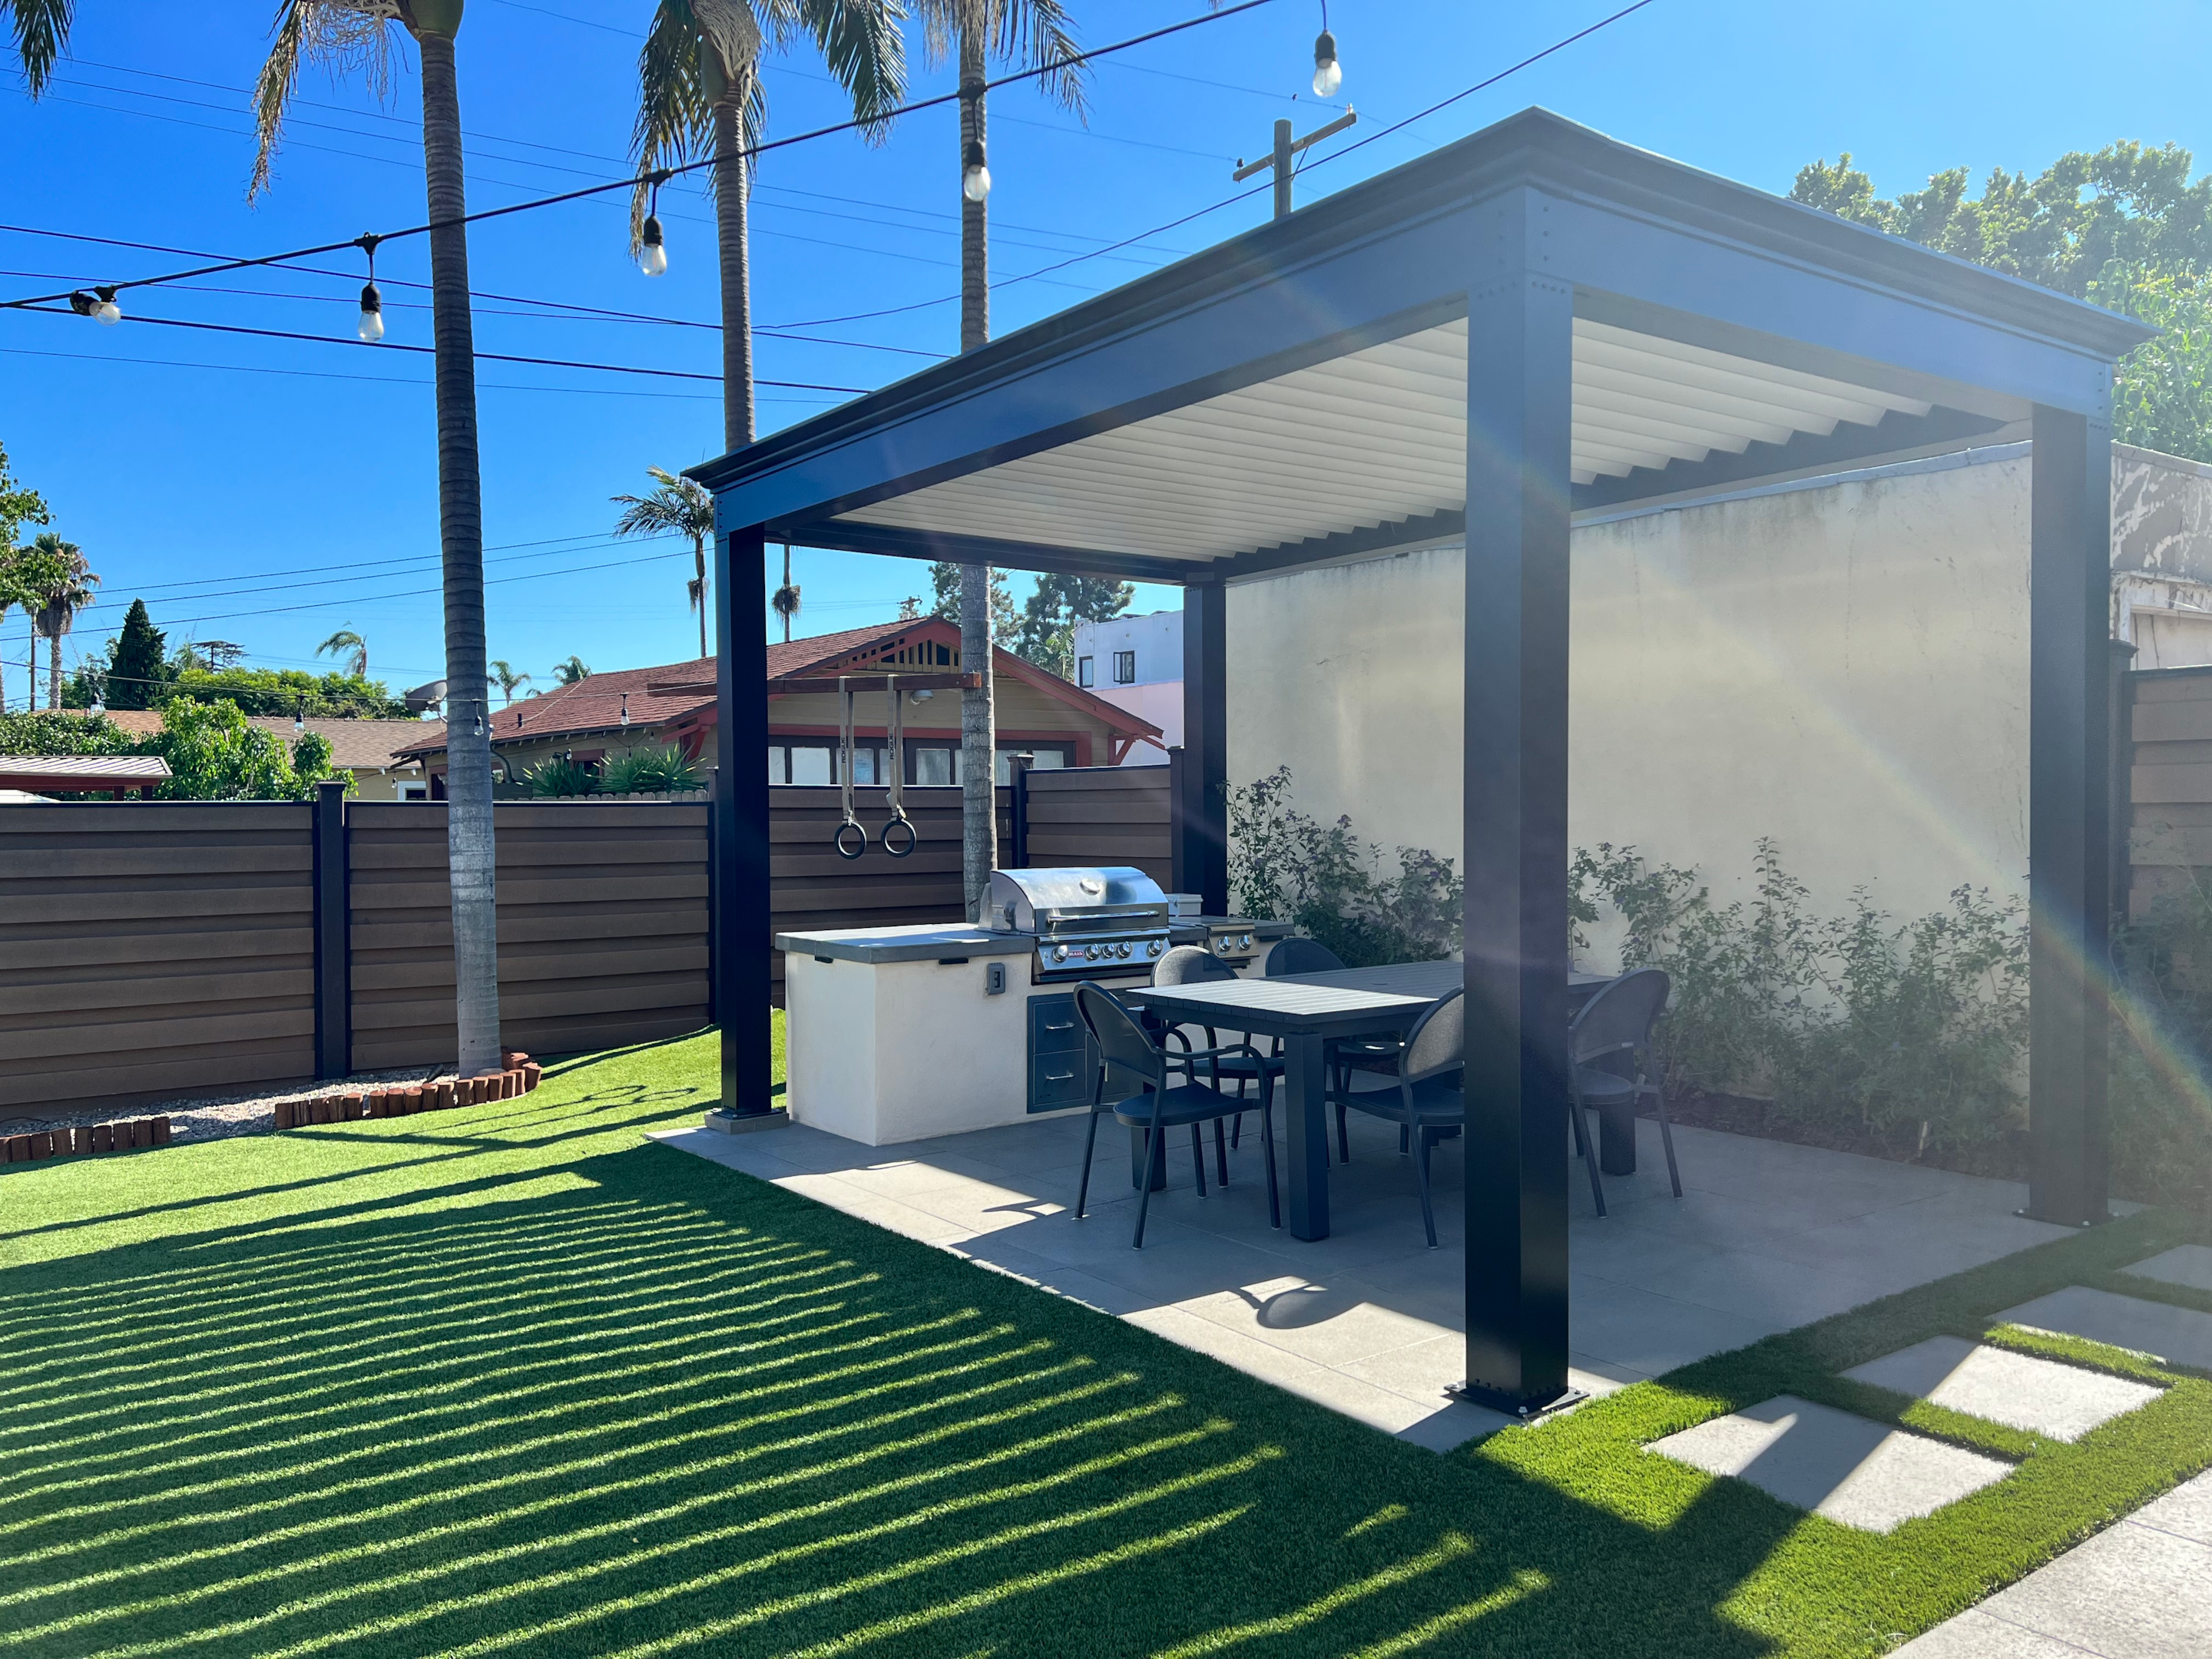 Nice dining areas to be had under a gorgeous aluminum pergola.  Ambient lighting and ornamental grasses abound, in this beautiful space.